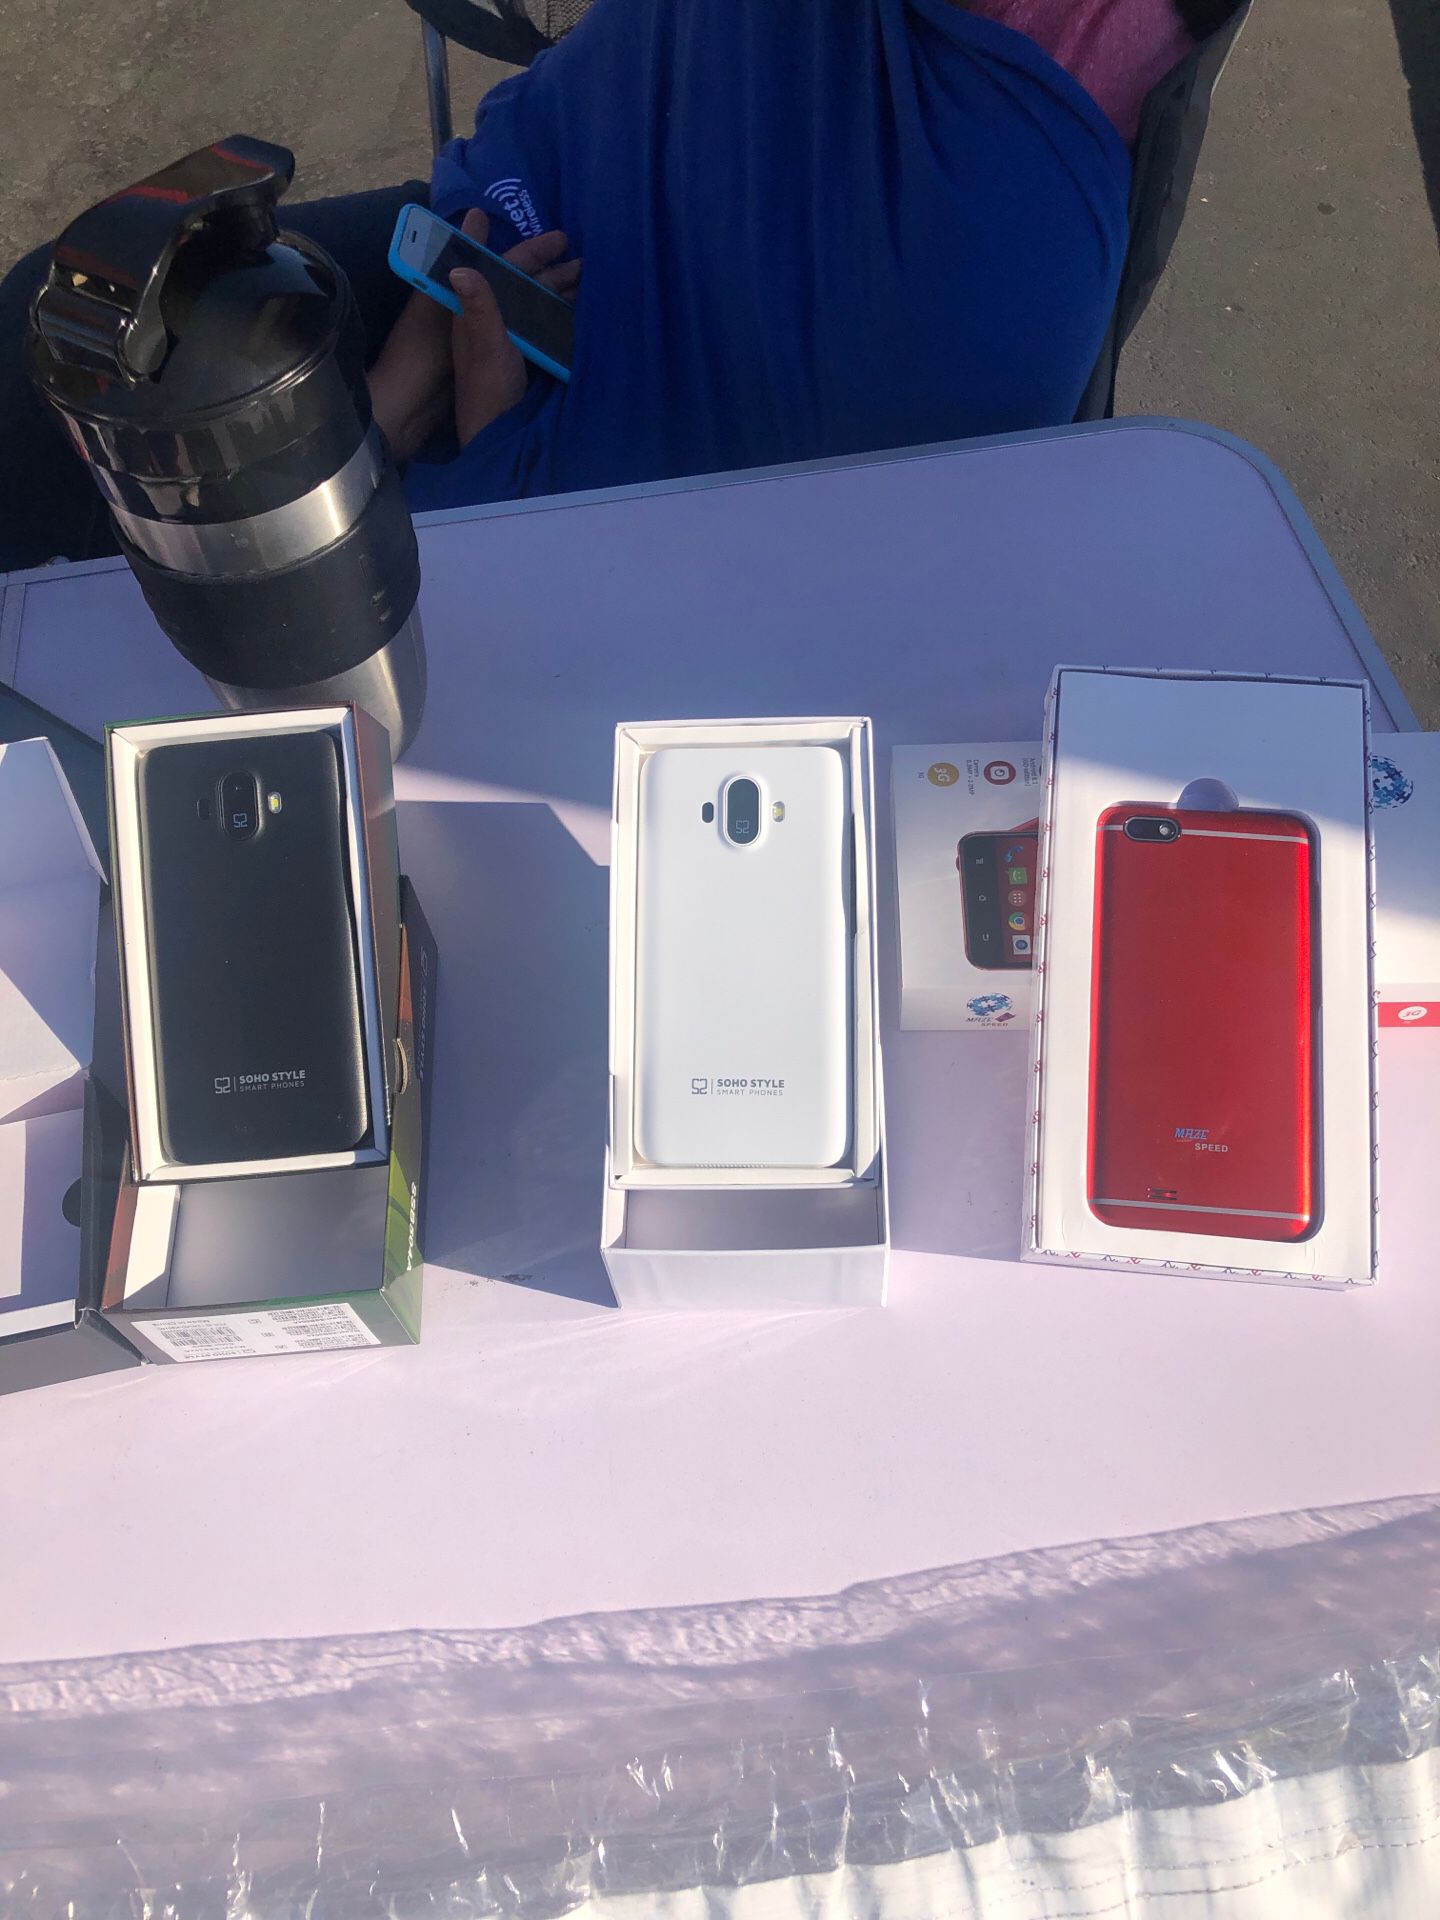 Free phones free service Michelle Obama phone in Long Beach area only